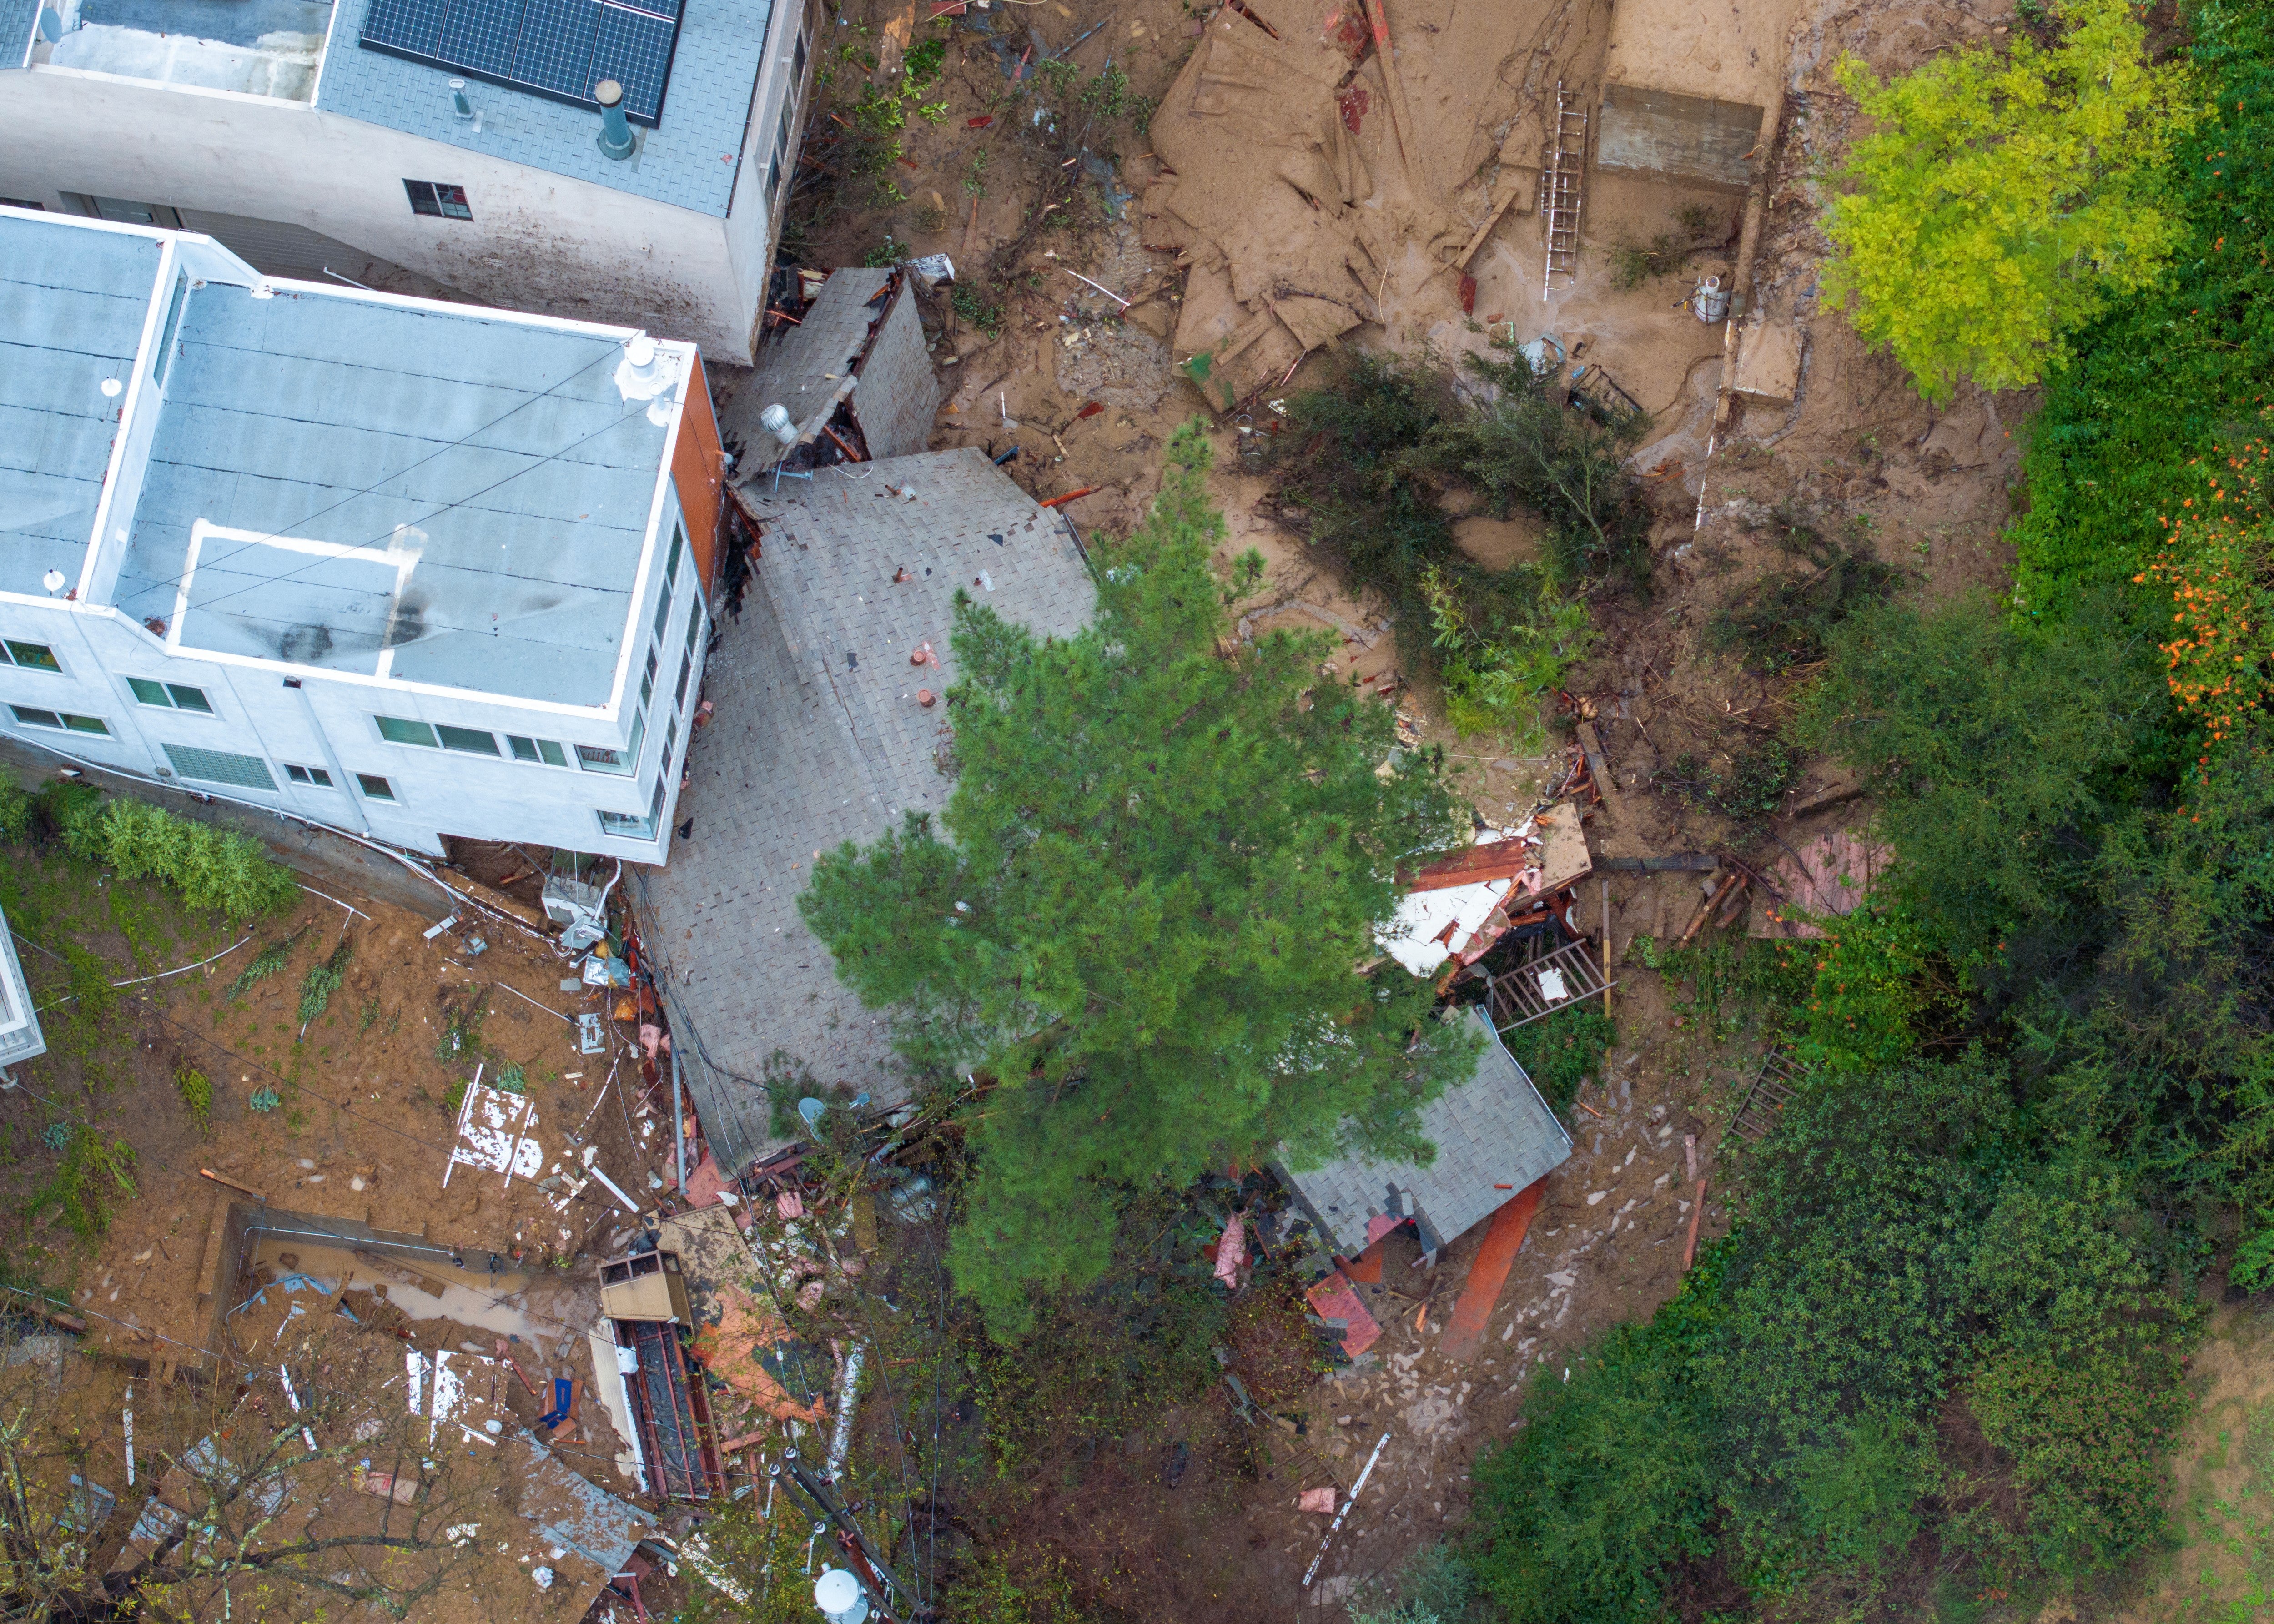 An aerial image of a home destroyed by a landslide in Los Angeles, California on Monday